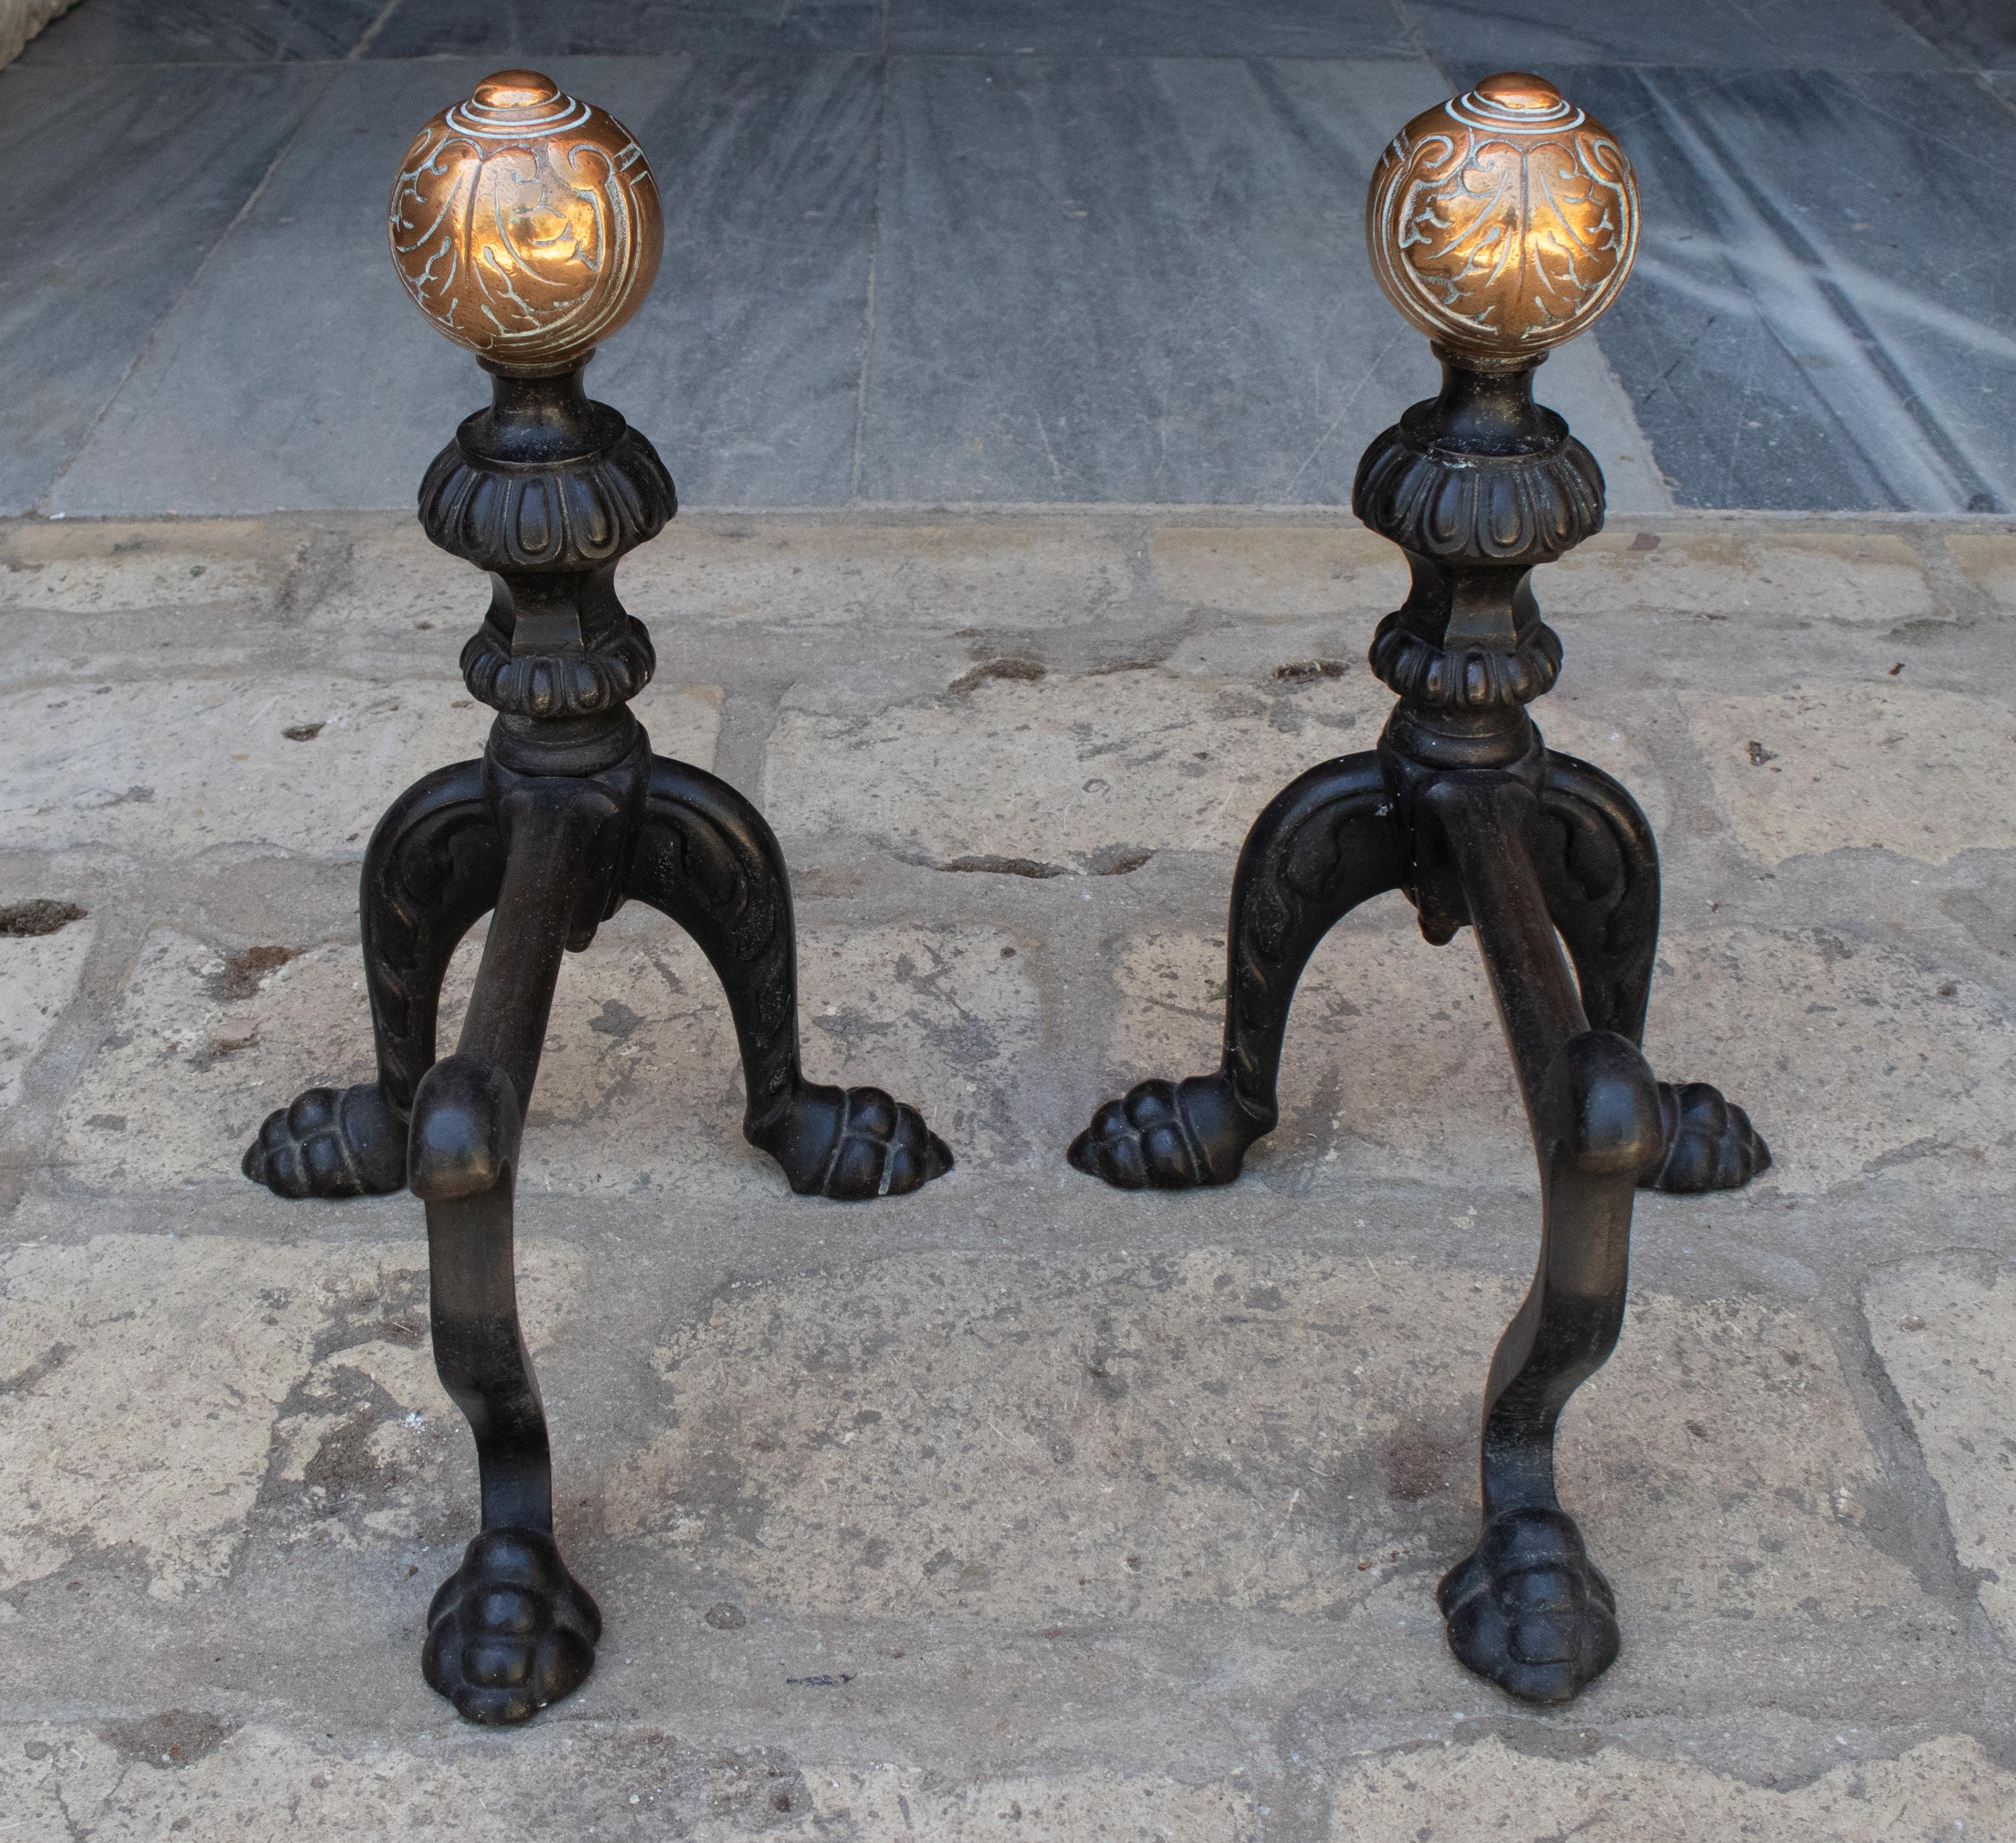 Bronze 19th Century English Pair of Wrought Iron Grates with Brass Fittings